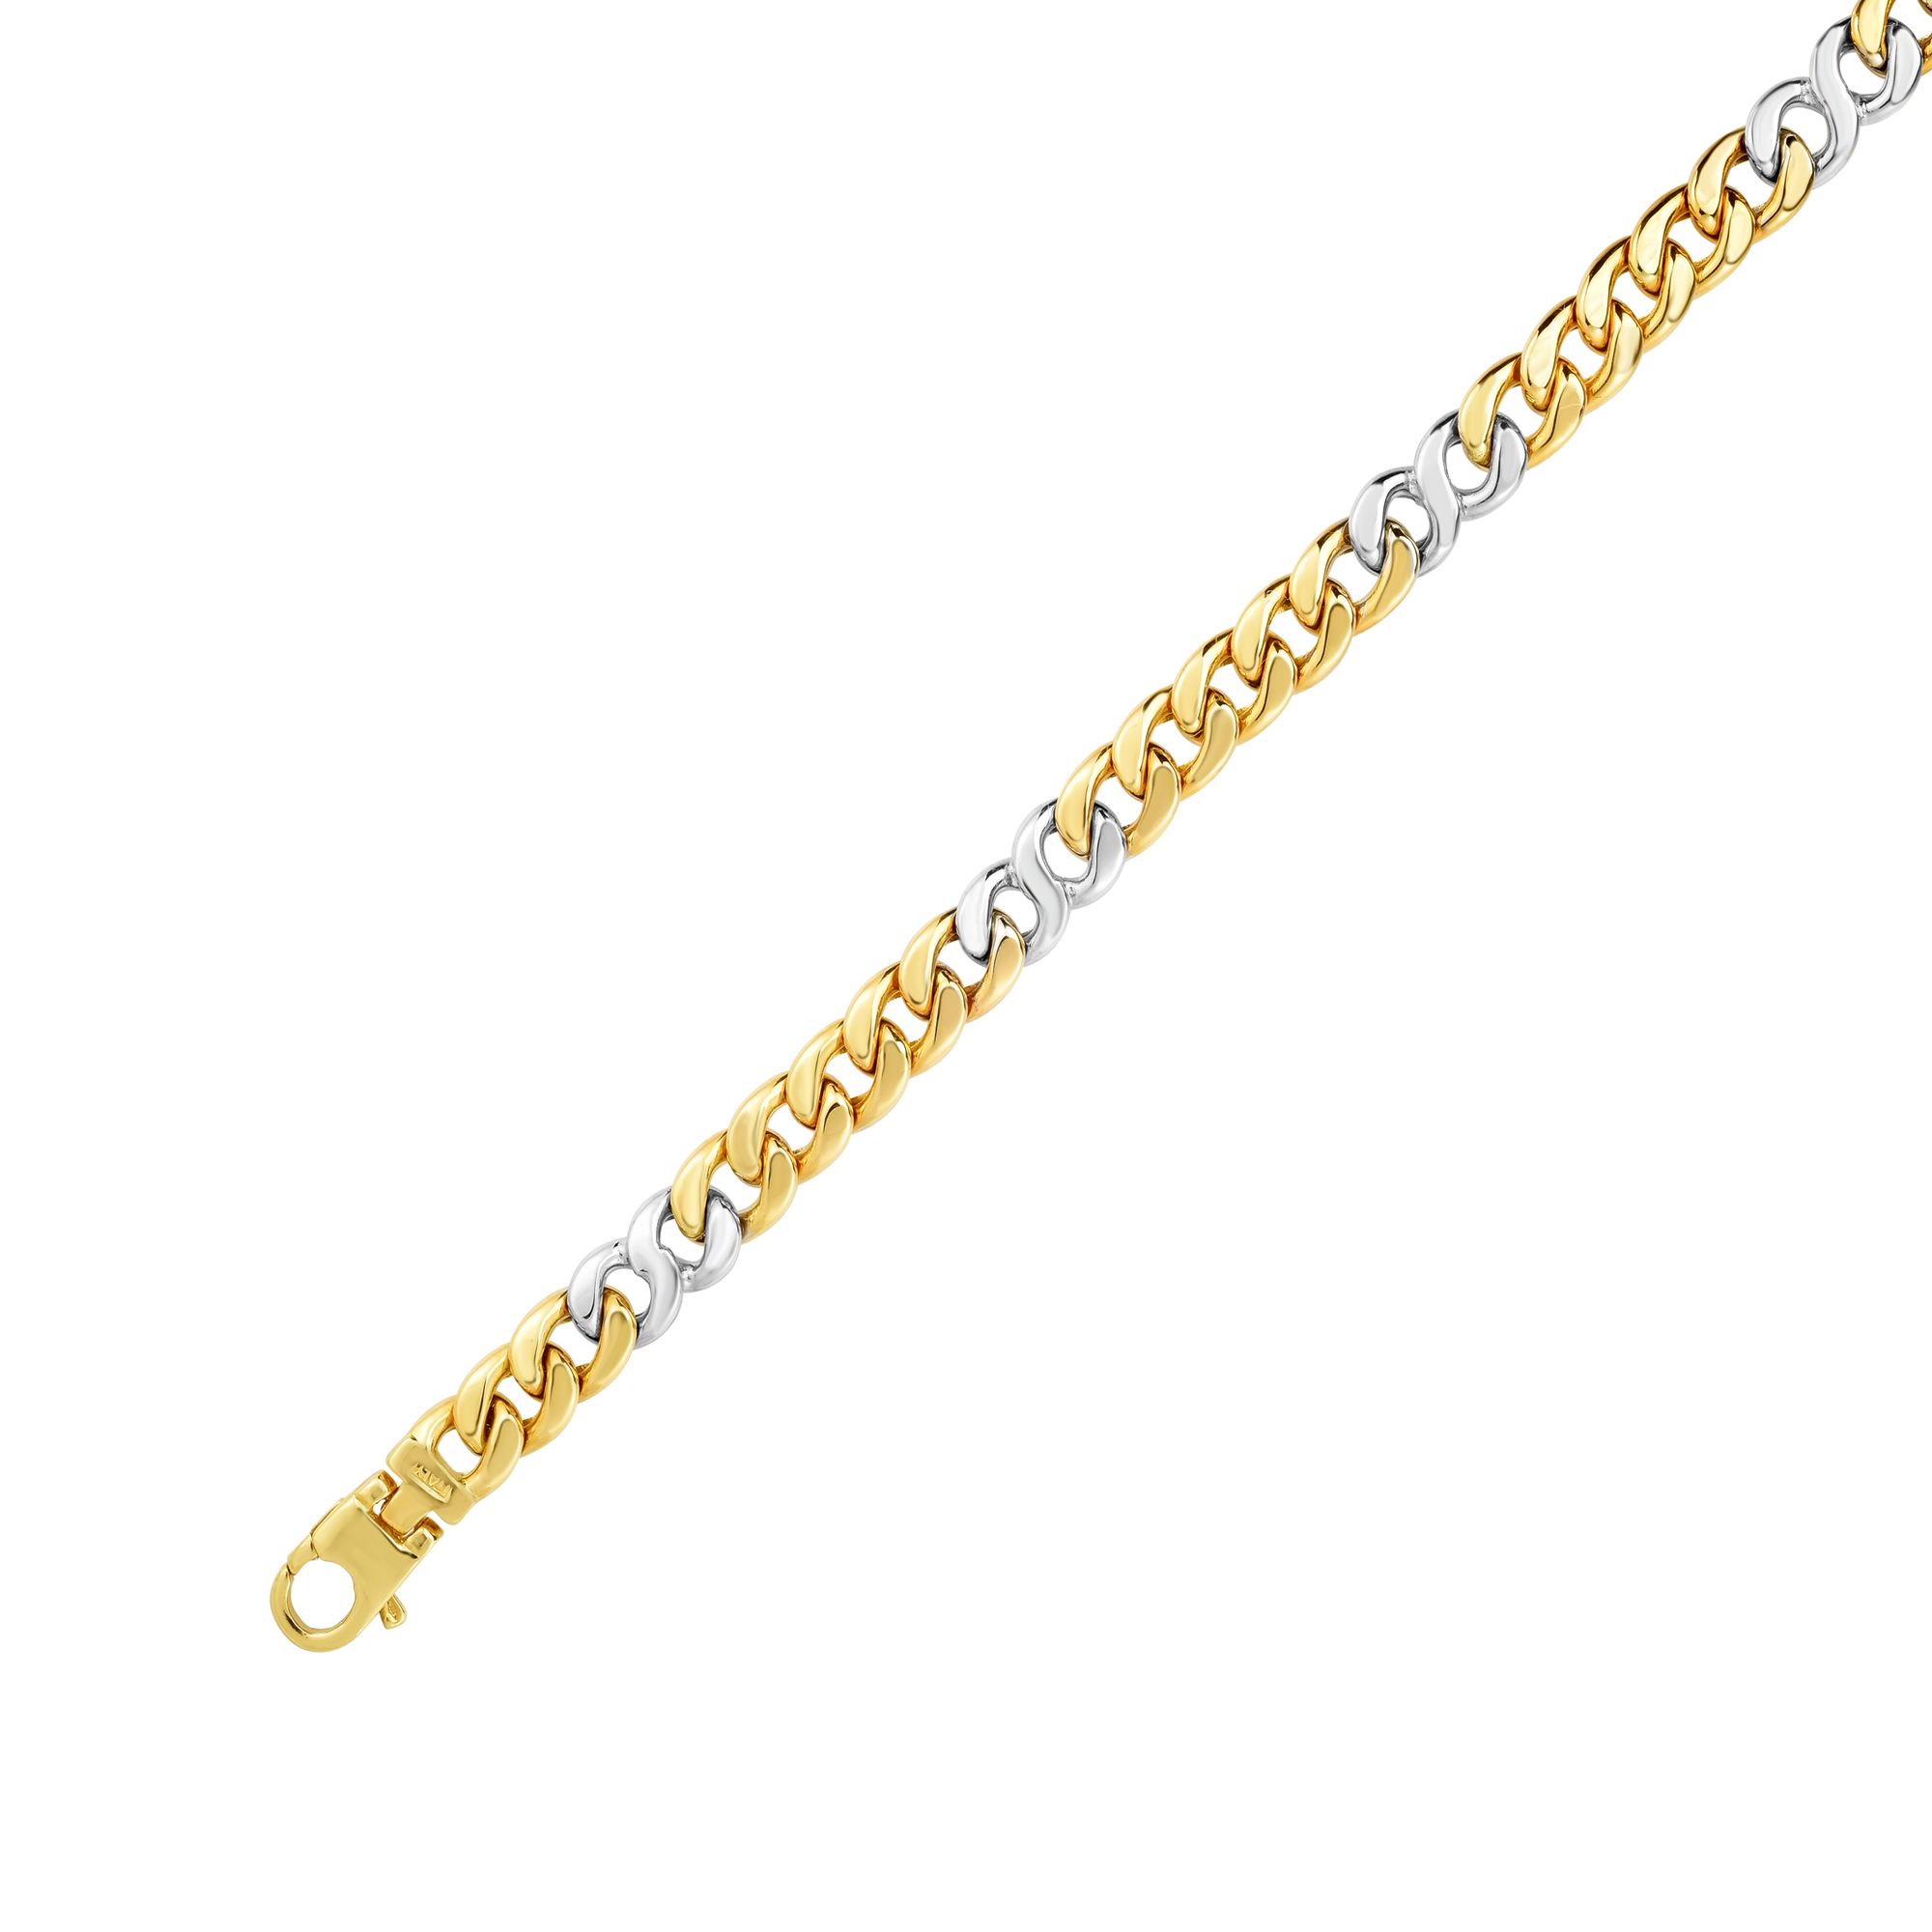 14kt Gold 8.5 inches Yellow+White Finish 7mm Shiny Oval Bracelet with Lobster Clasp